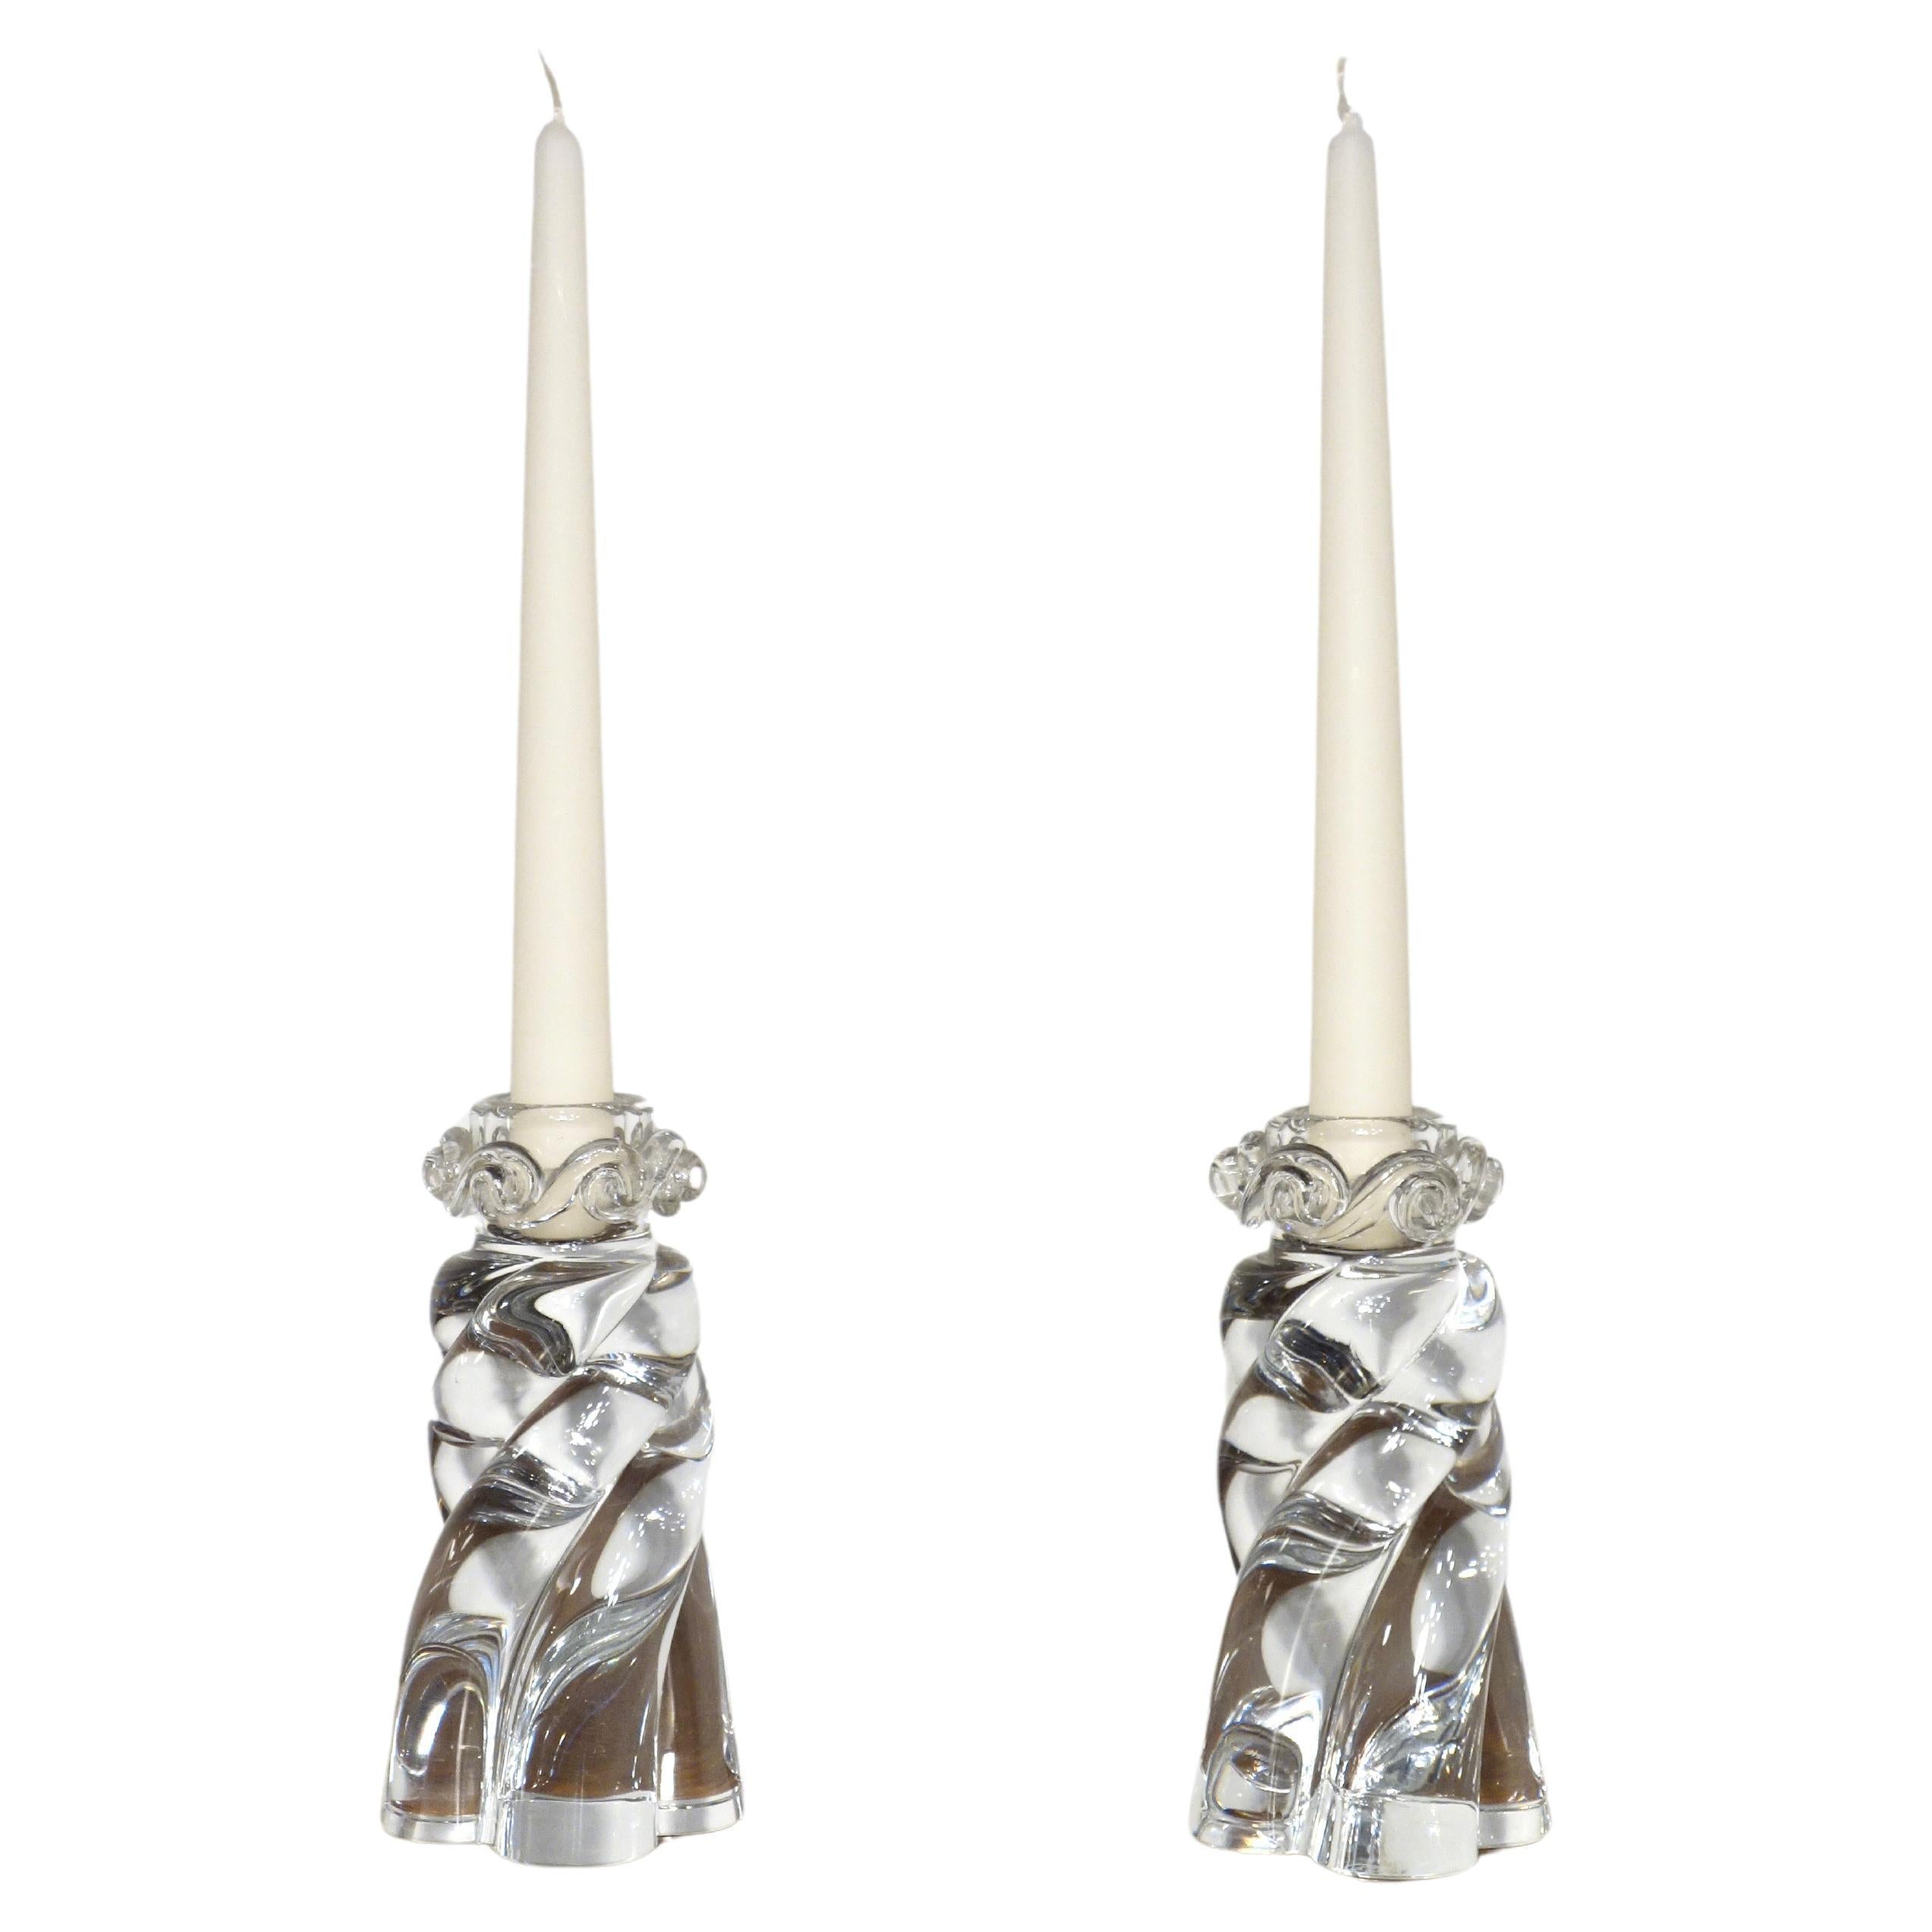 French Pair of Aladdin Crystal Candlesticks by Baccarat 1960's For Sale